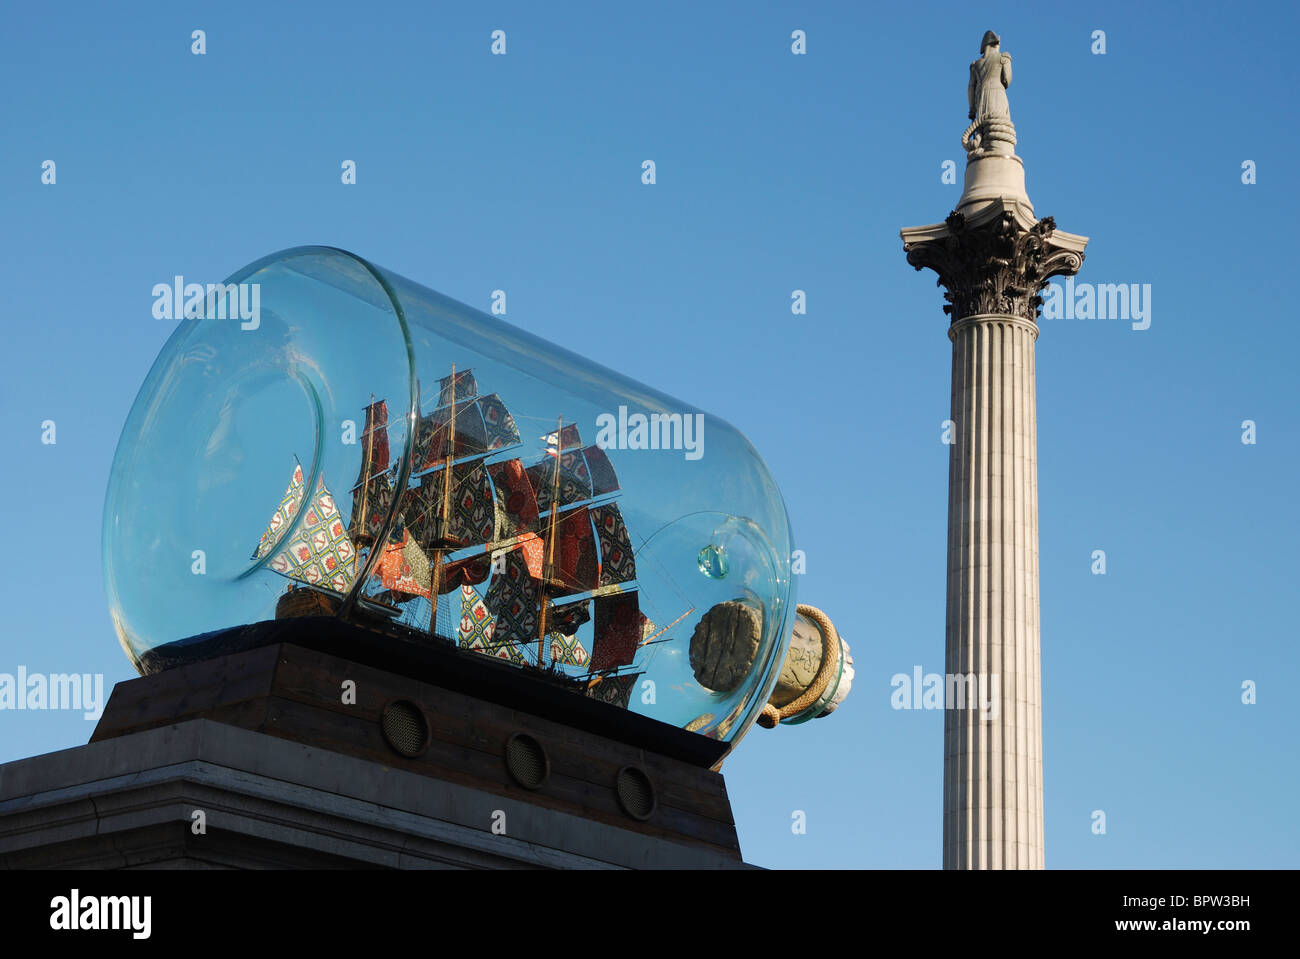 Nelson's Ship in a Bottle, by Yinka Shonibare, on the fourth plinth of Trafalgar Square, London, England. Stock Photo